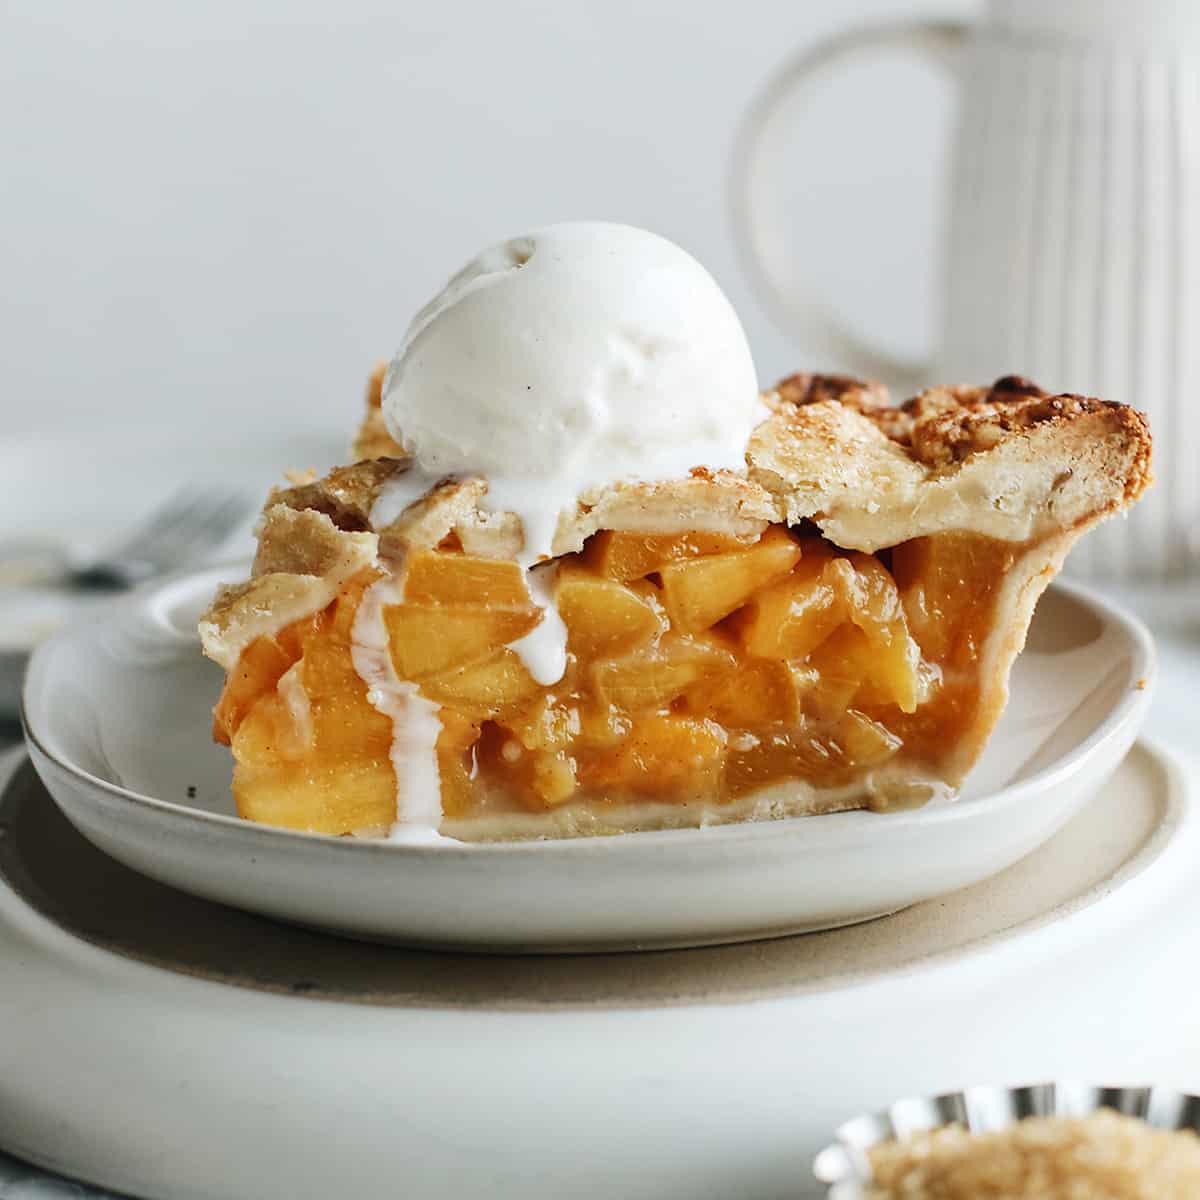 side view of a slice of peach pie on a plate with vanilla ice cream on top